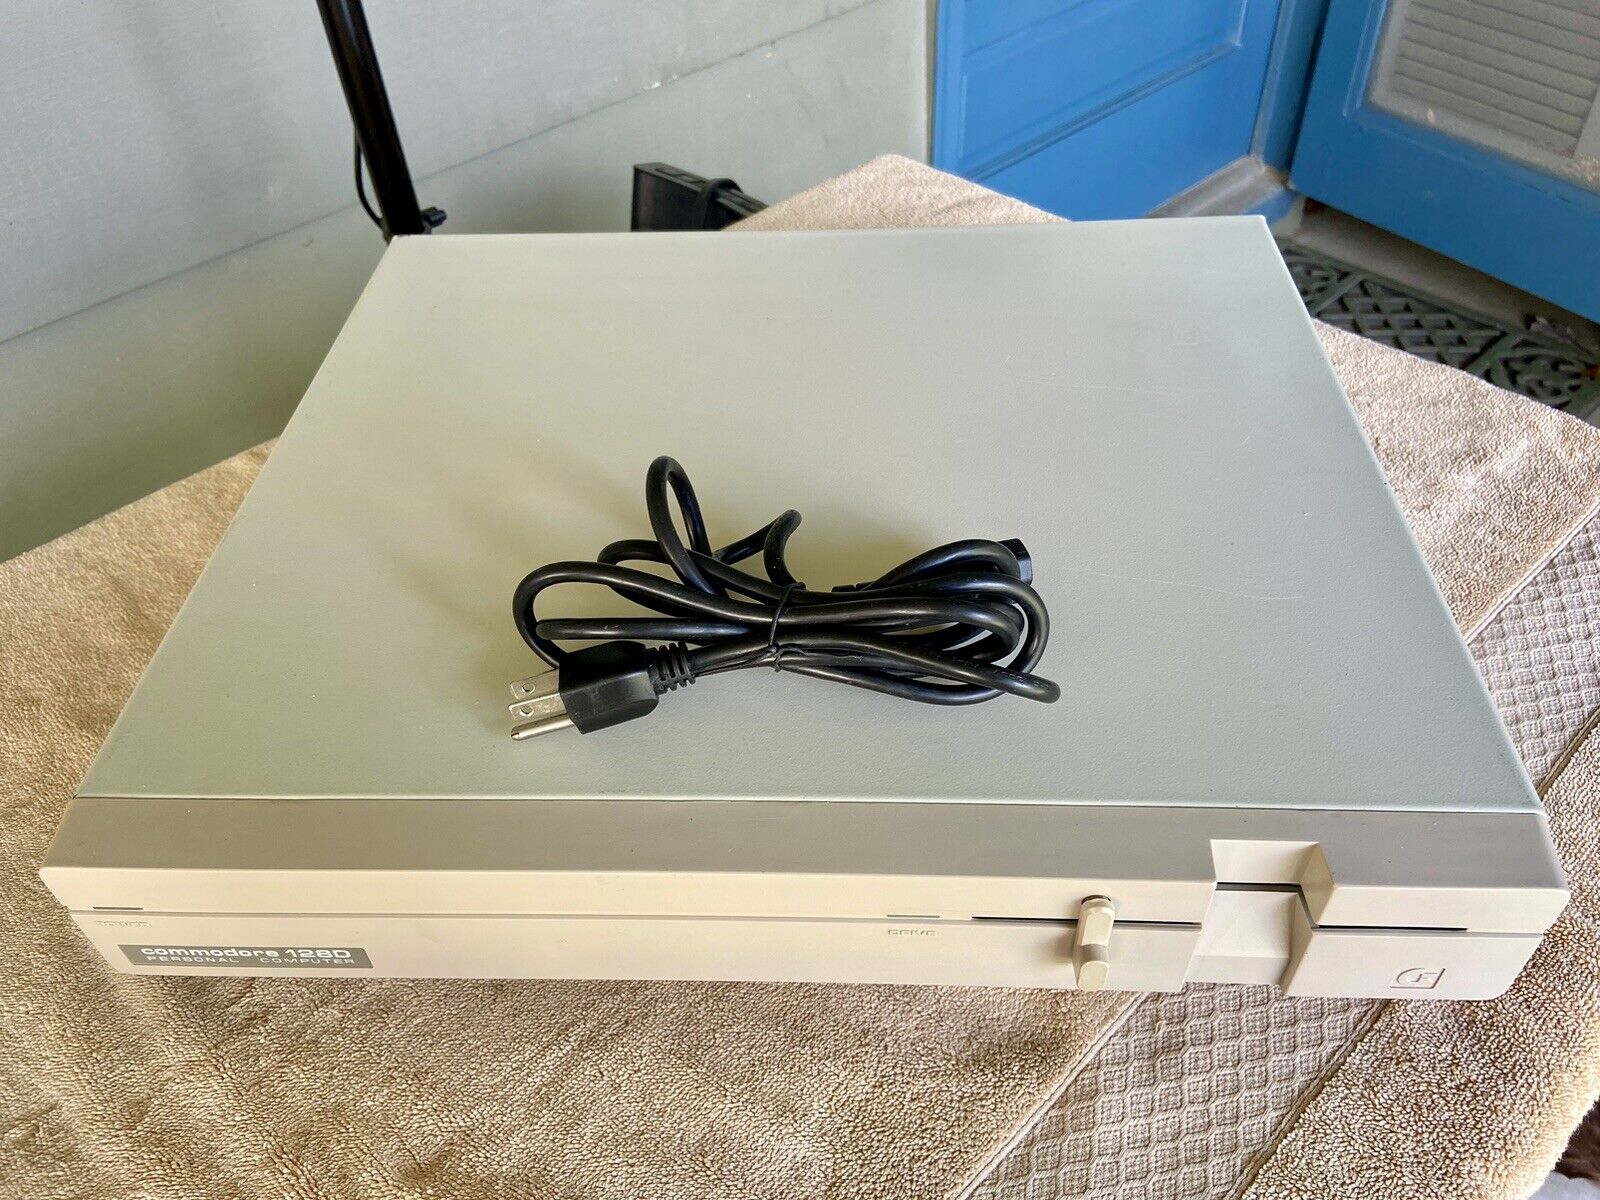 Vintage Commodore 128d Computer with Power Cord C-128D